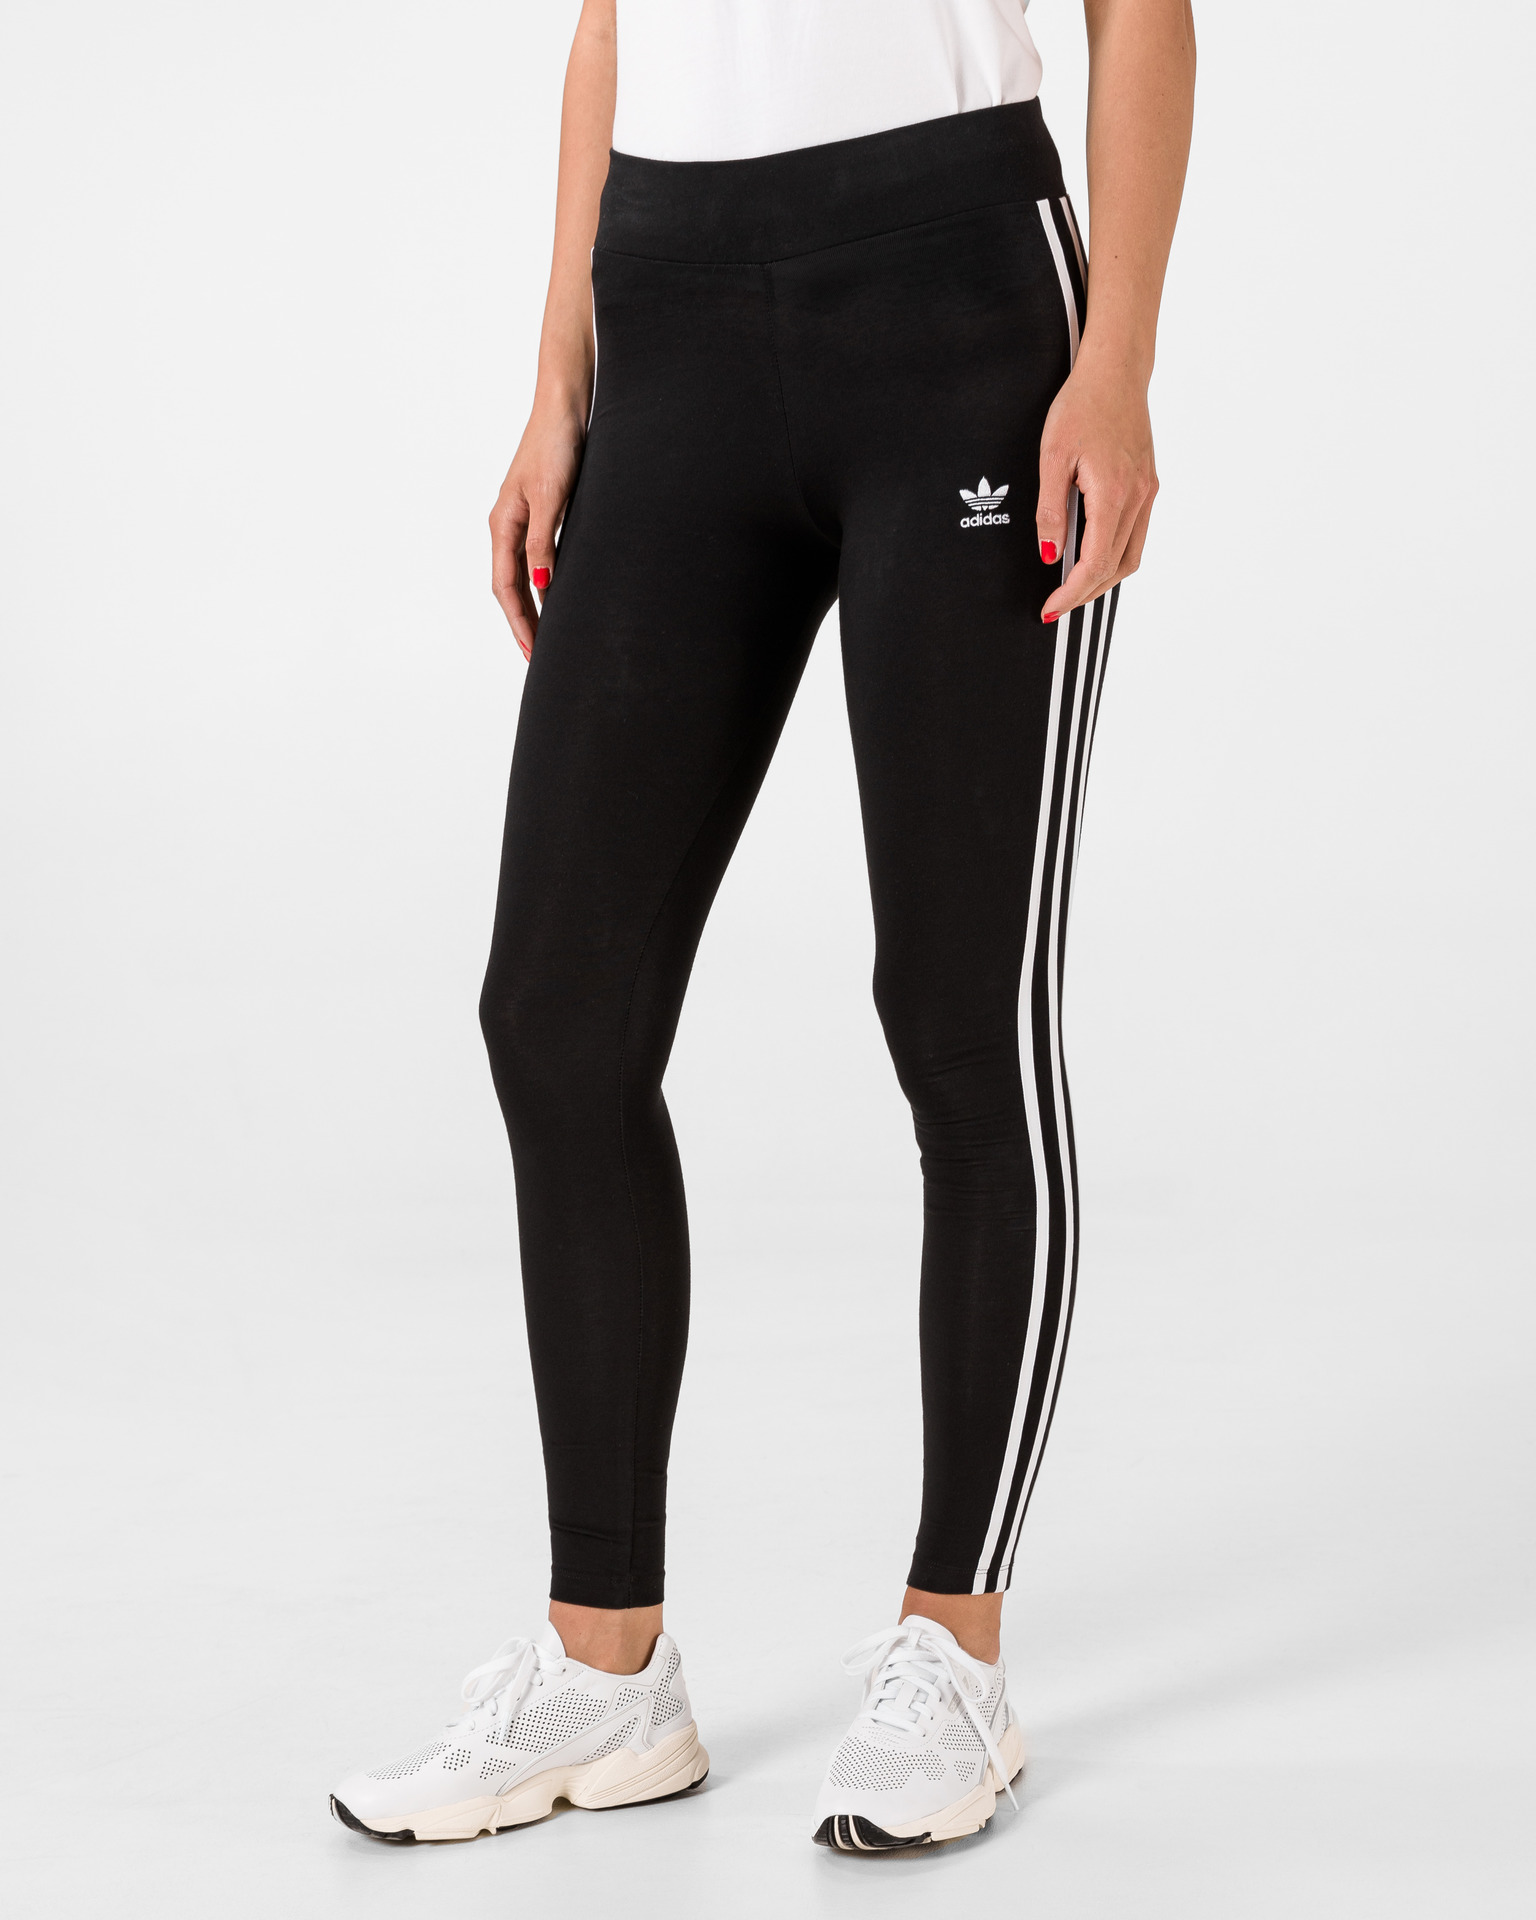 Awesome Adidas Legging Outfits Ideas to Steal - Fancy Ideas about  Hairstyles, Nails, Outfits, and Everything | Outfits with leggings, Sporty  outfits, Adidas outfit